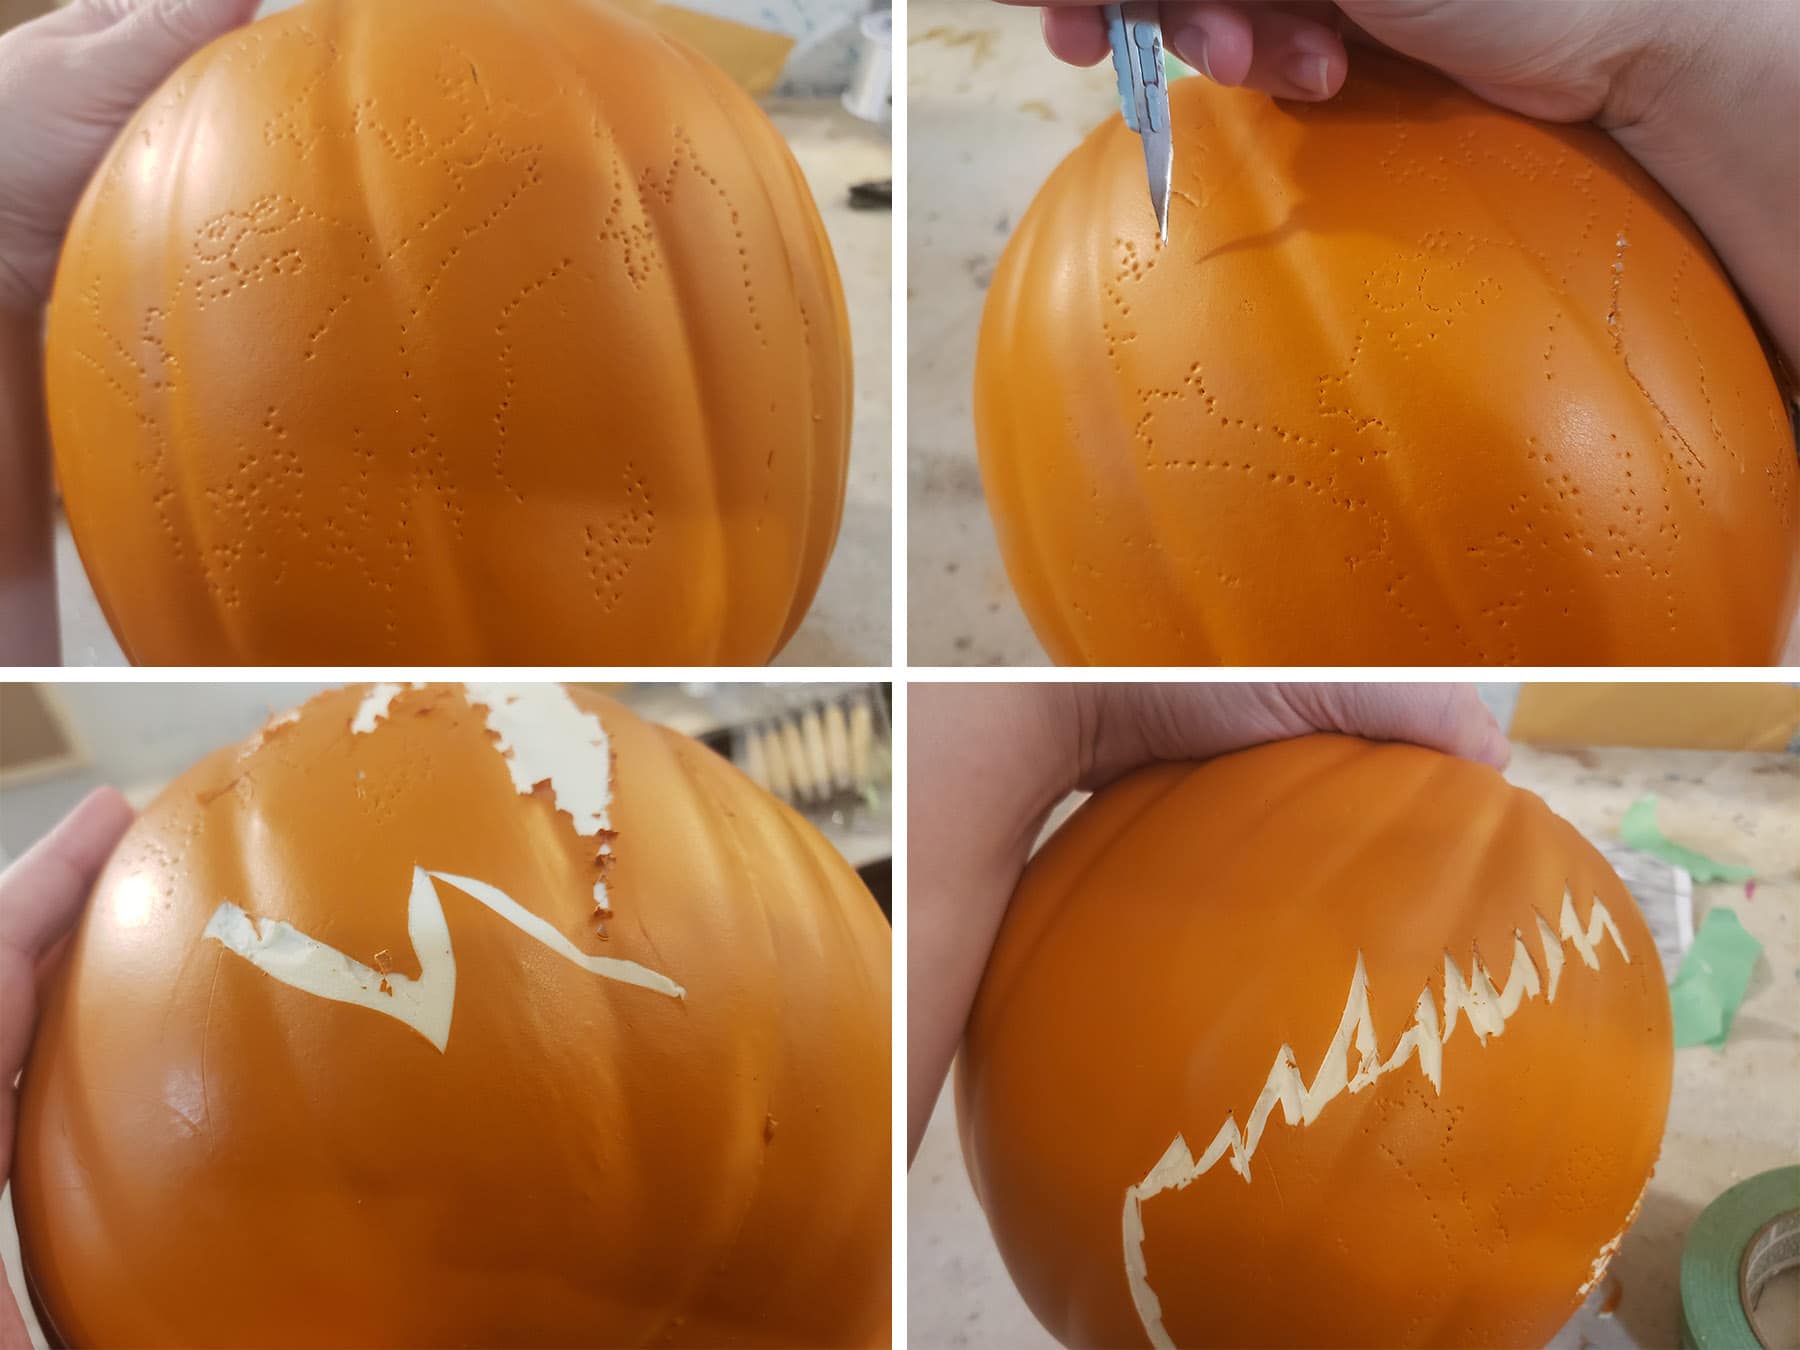 A scalpel being used to trace the Elmo design and lift out sections of orange pumpkin skin.